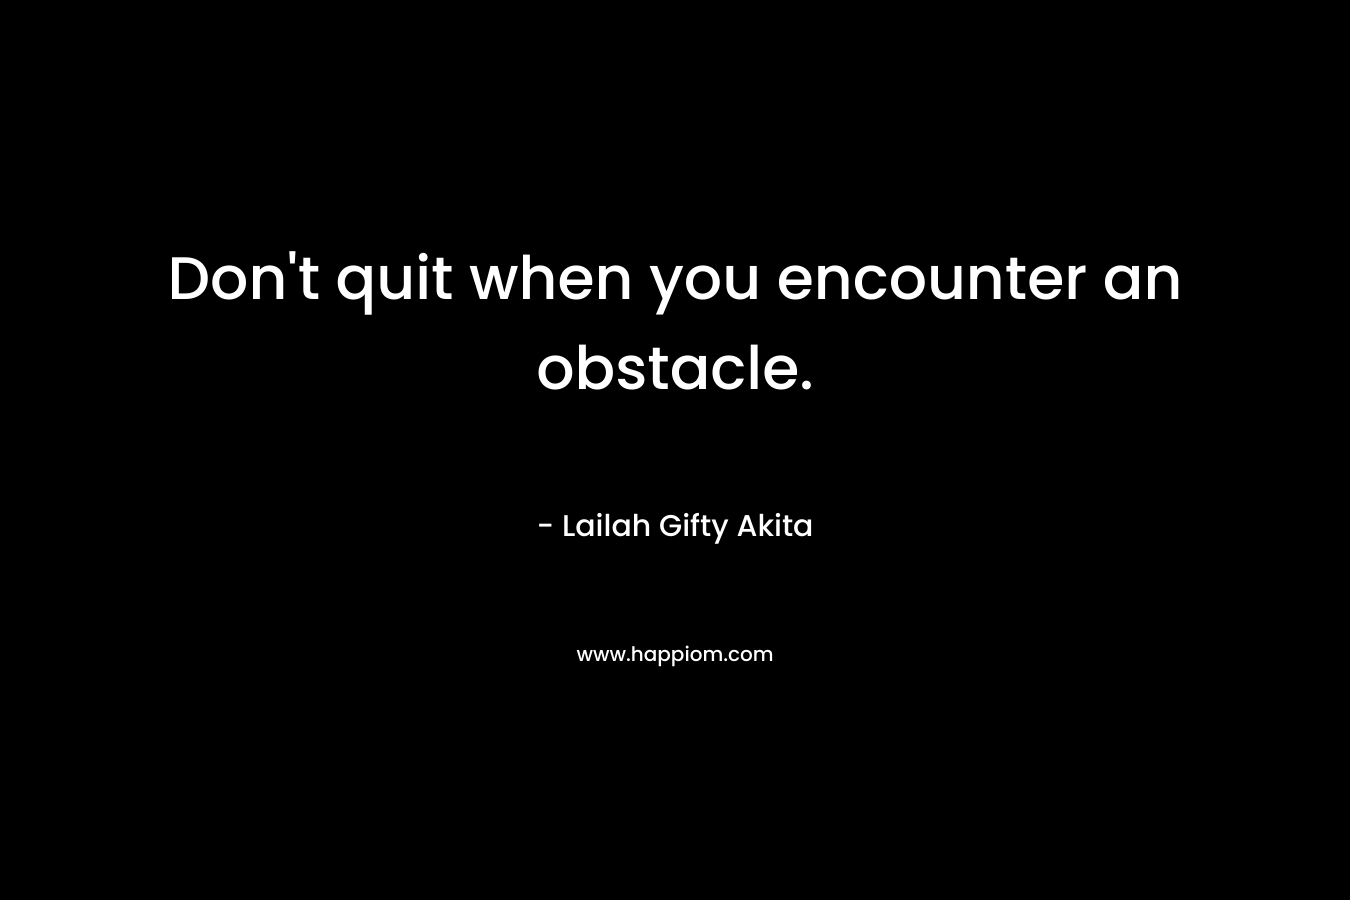 Don't quit when you encounter an obstacle.